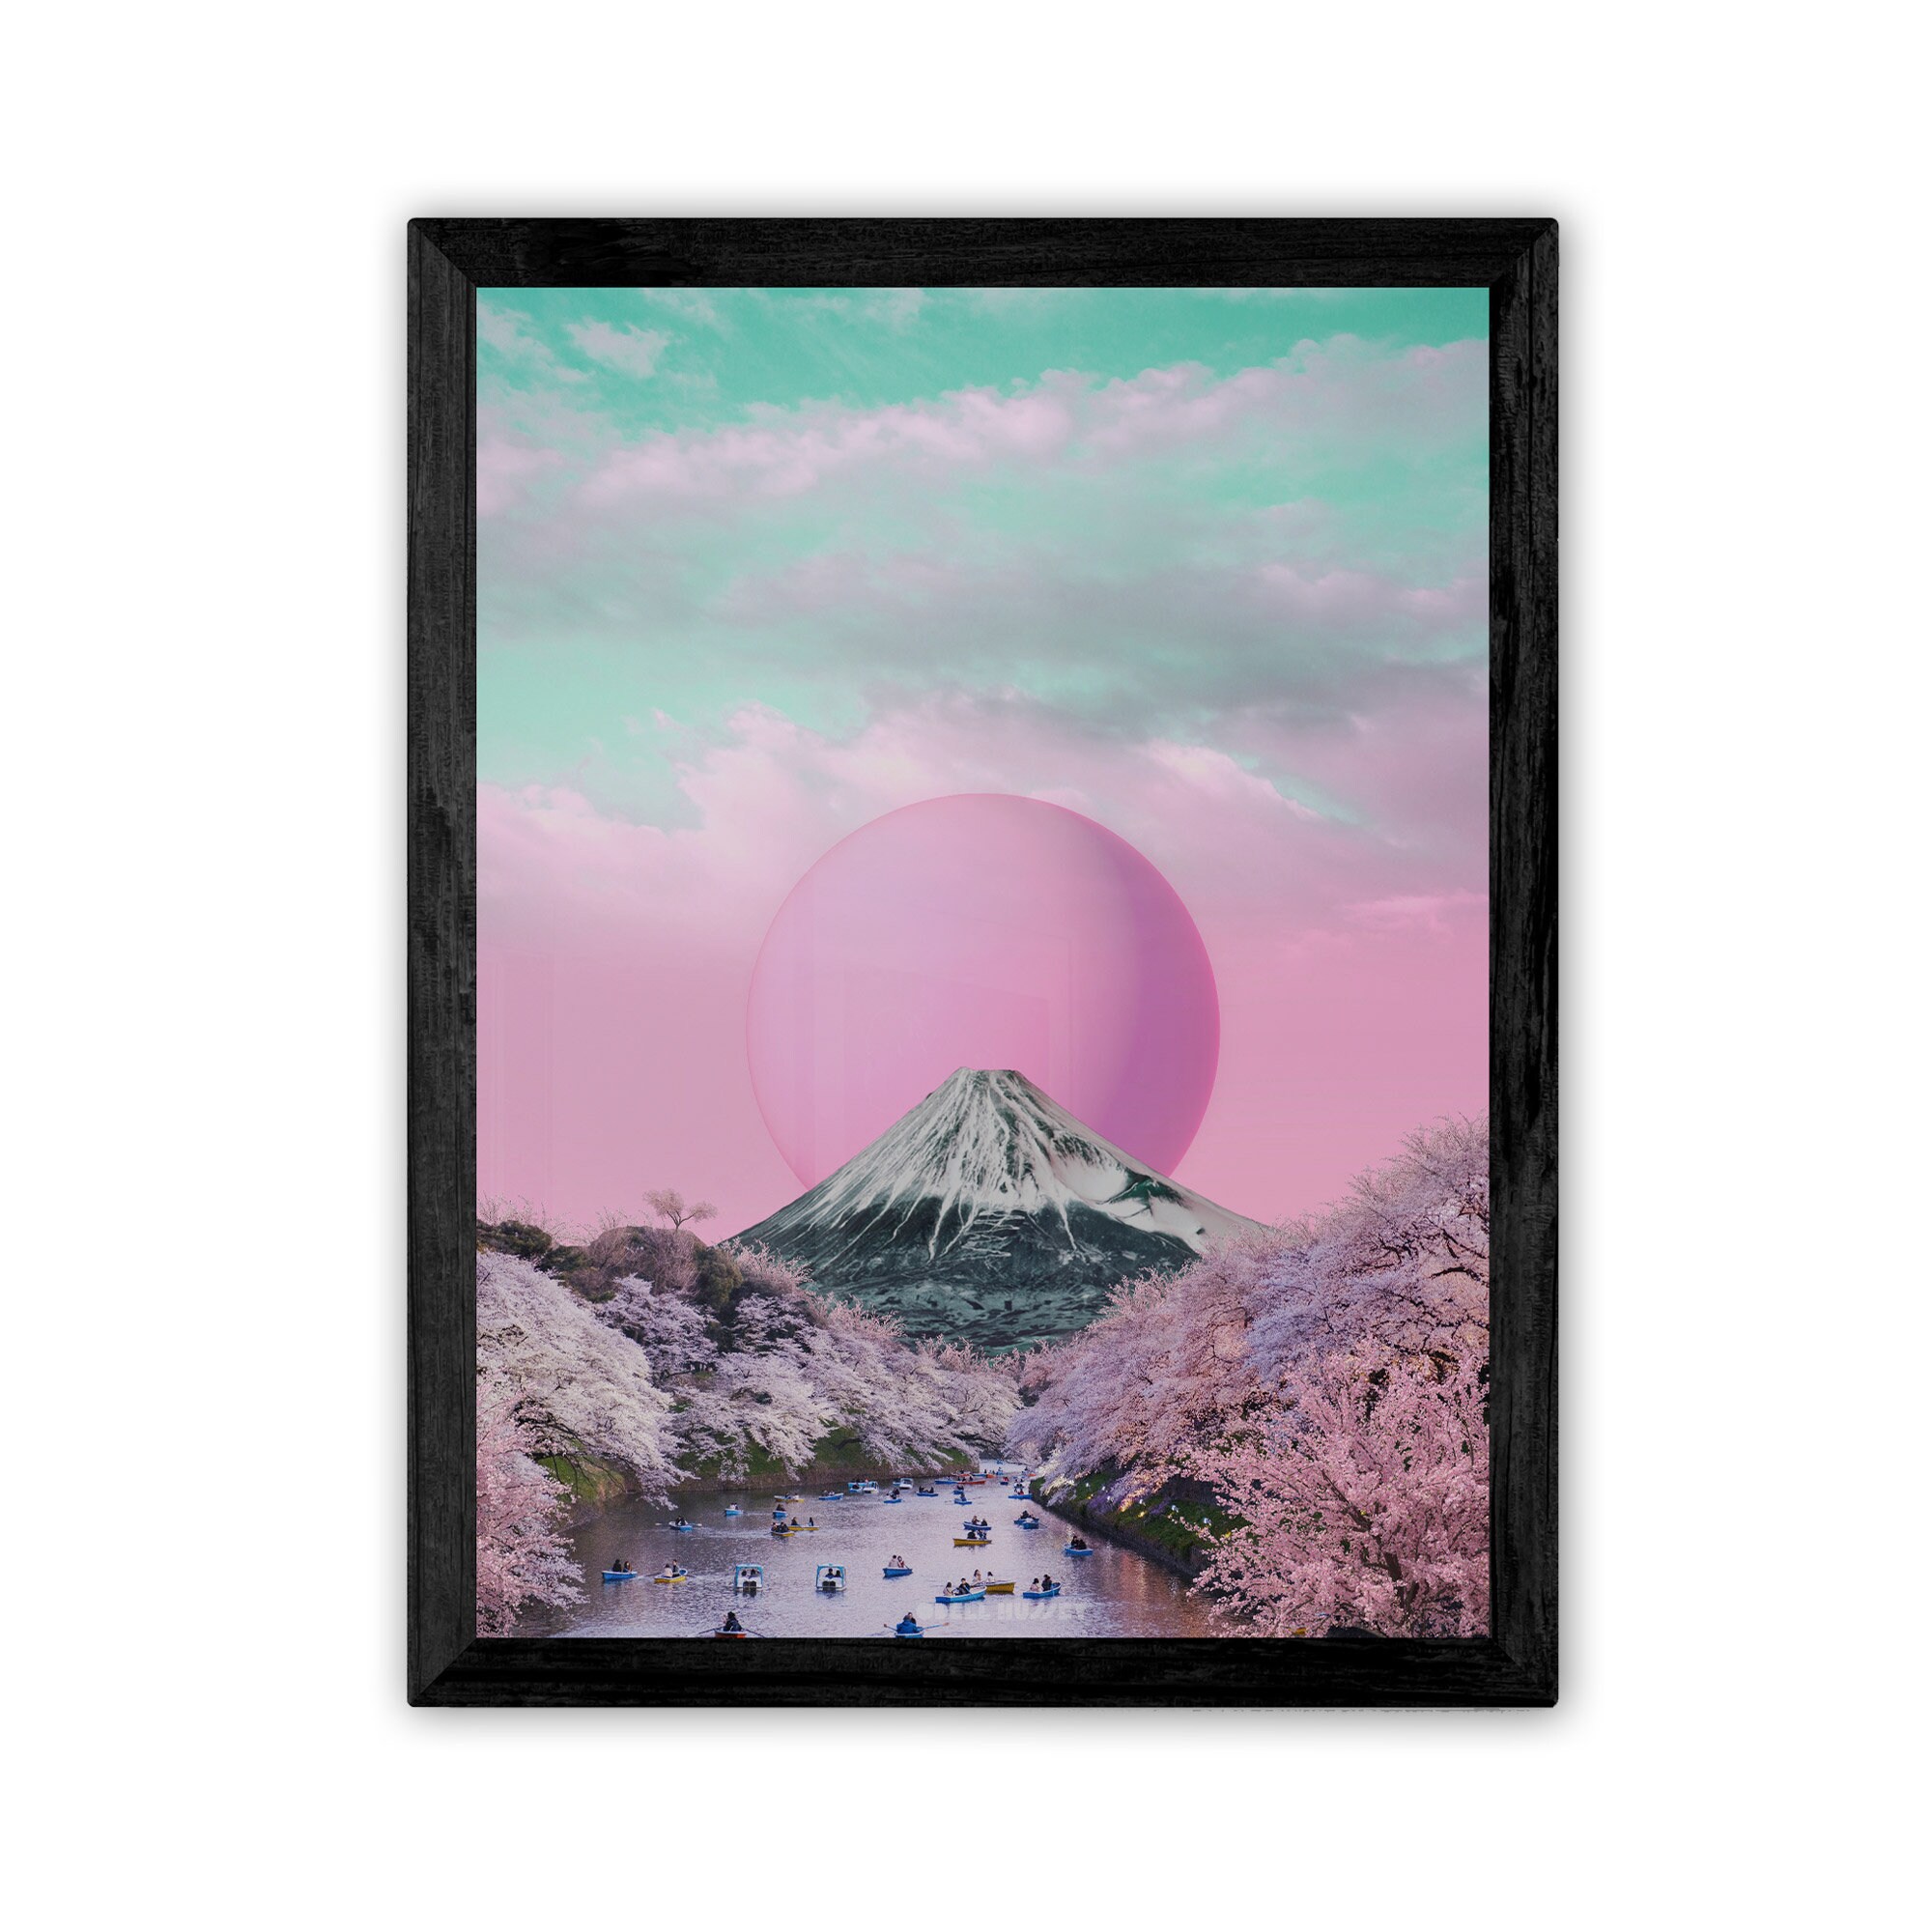 Fuji-San Life Poster  Print for Mt Fuji and collage art fans, FREE SHIPPING in US, wall art decor for modern homes and apartments